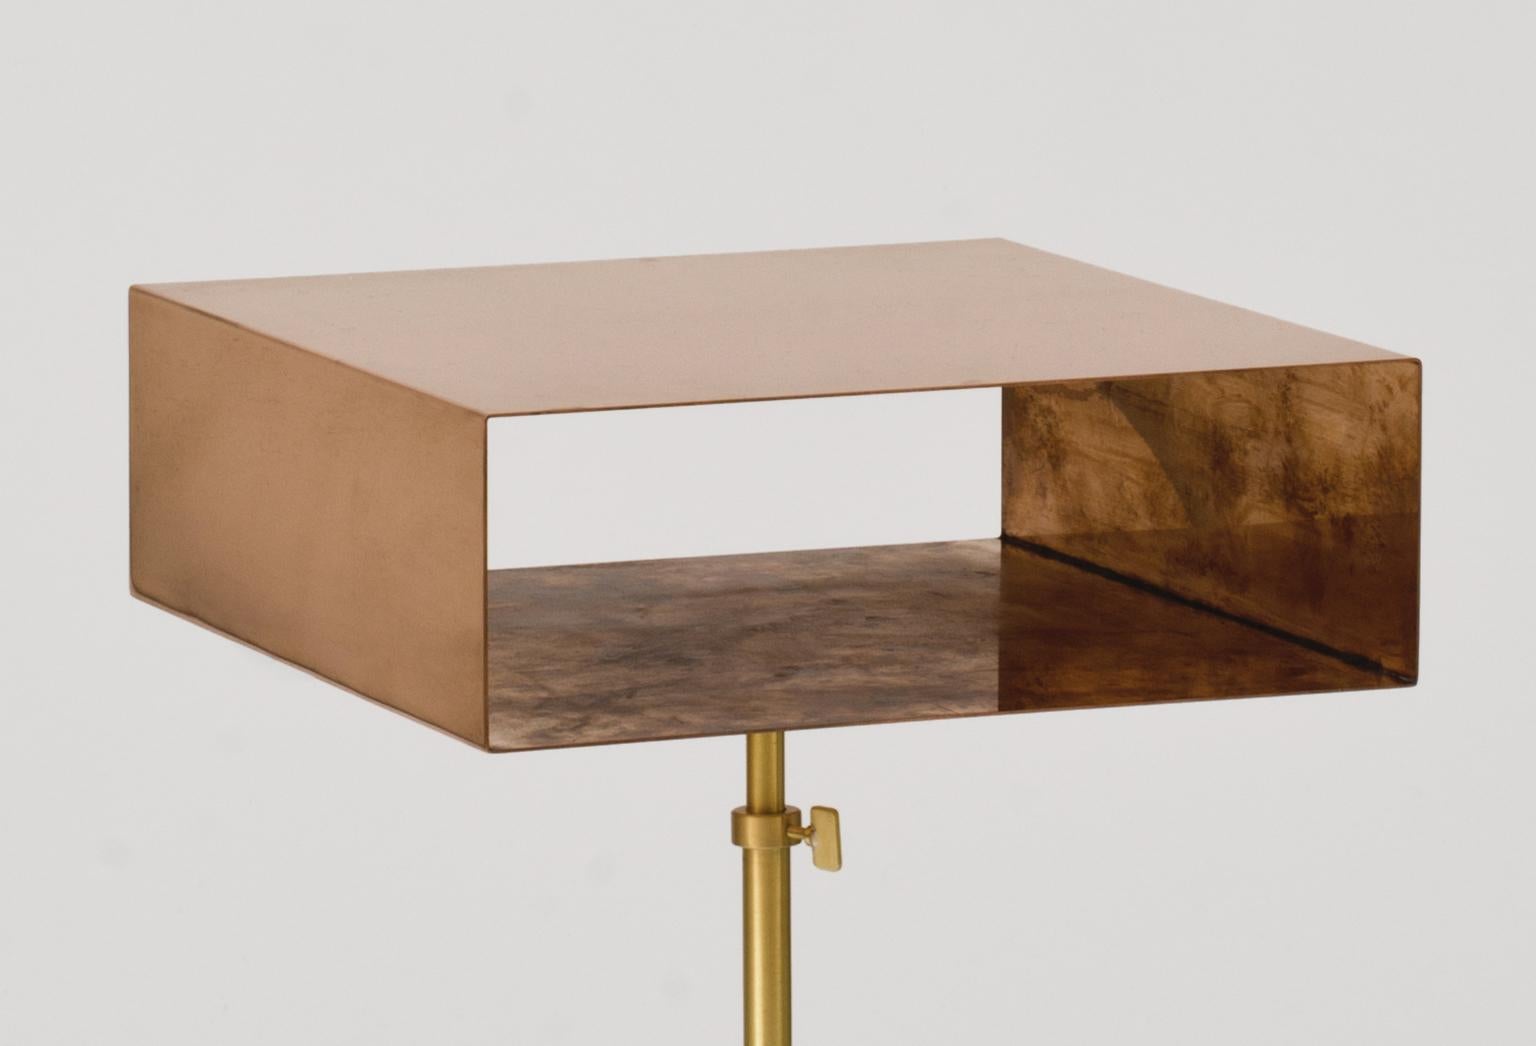 These brass and copper side table are inspired to the adjustable bases of the canterburies at La Scala in Milan. The inner part of the brass top oxidizes with the passing of time, which will confer a retro allure to this unique piece. 

Each piece